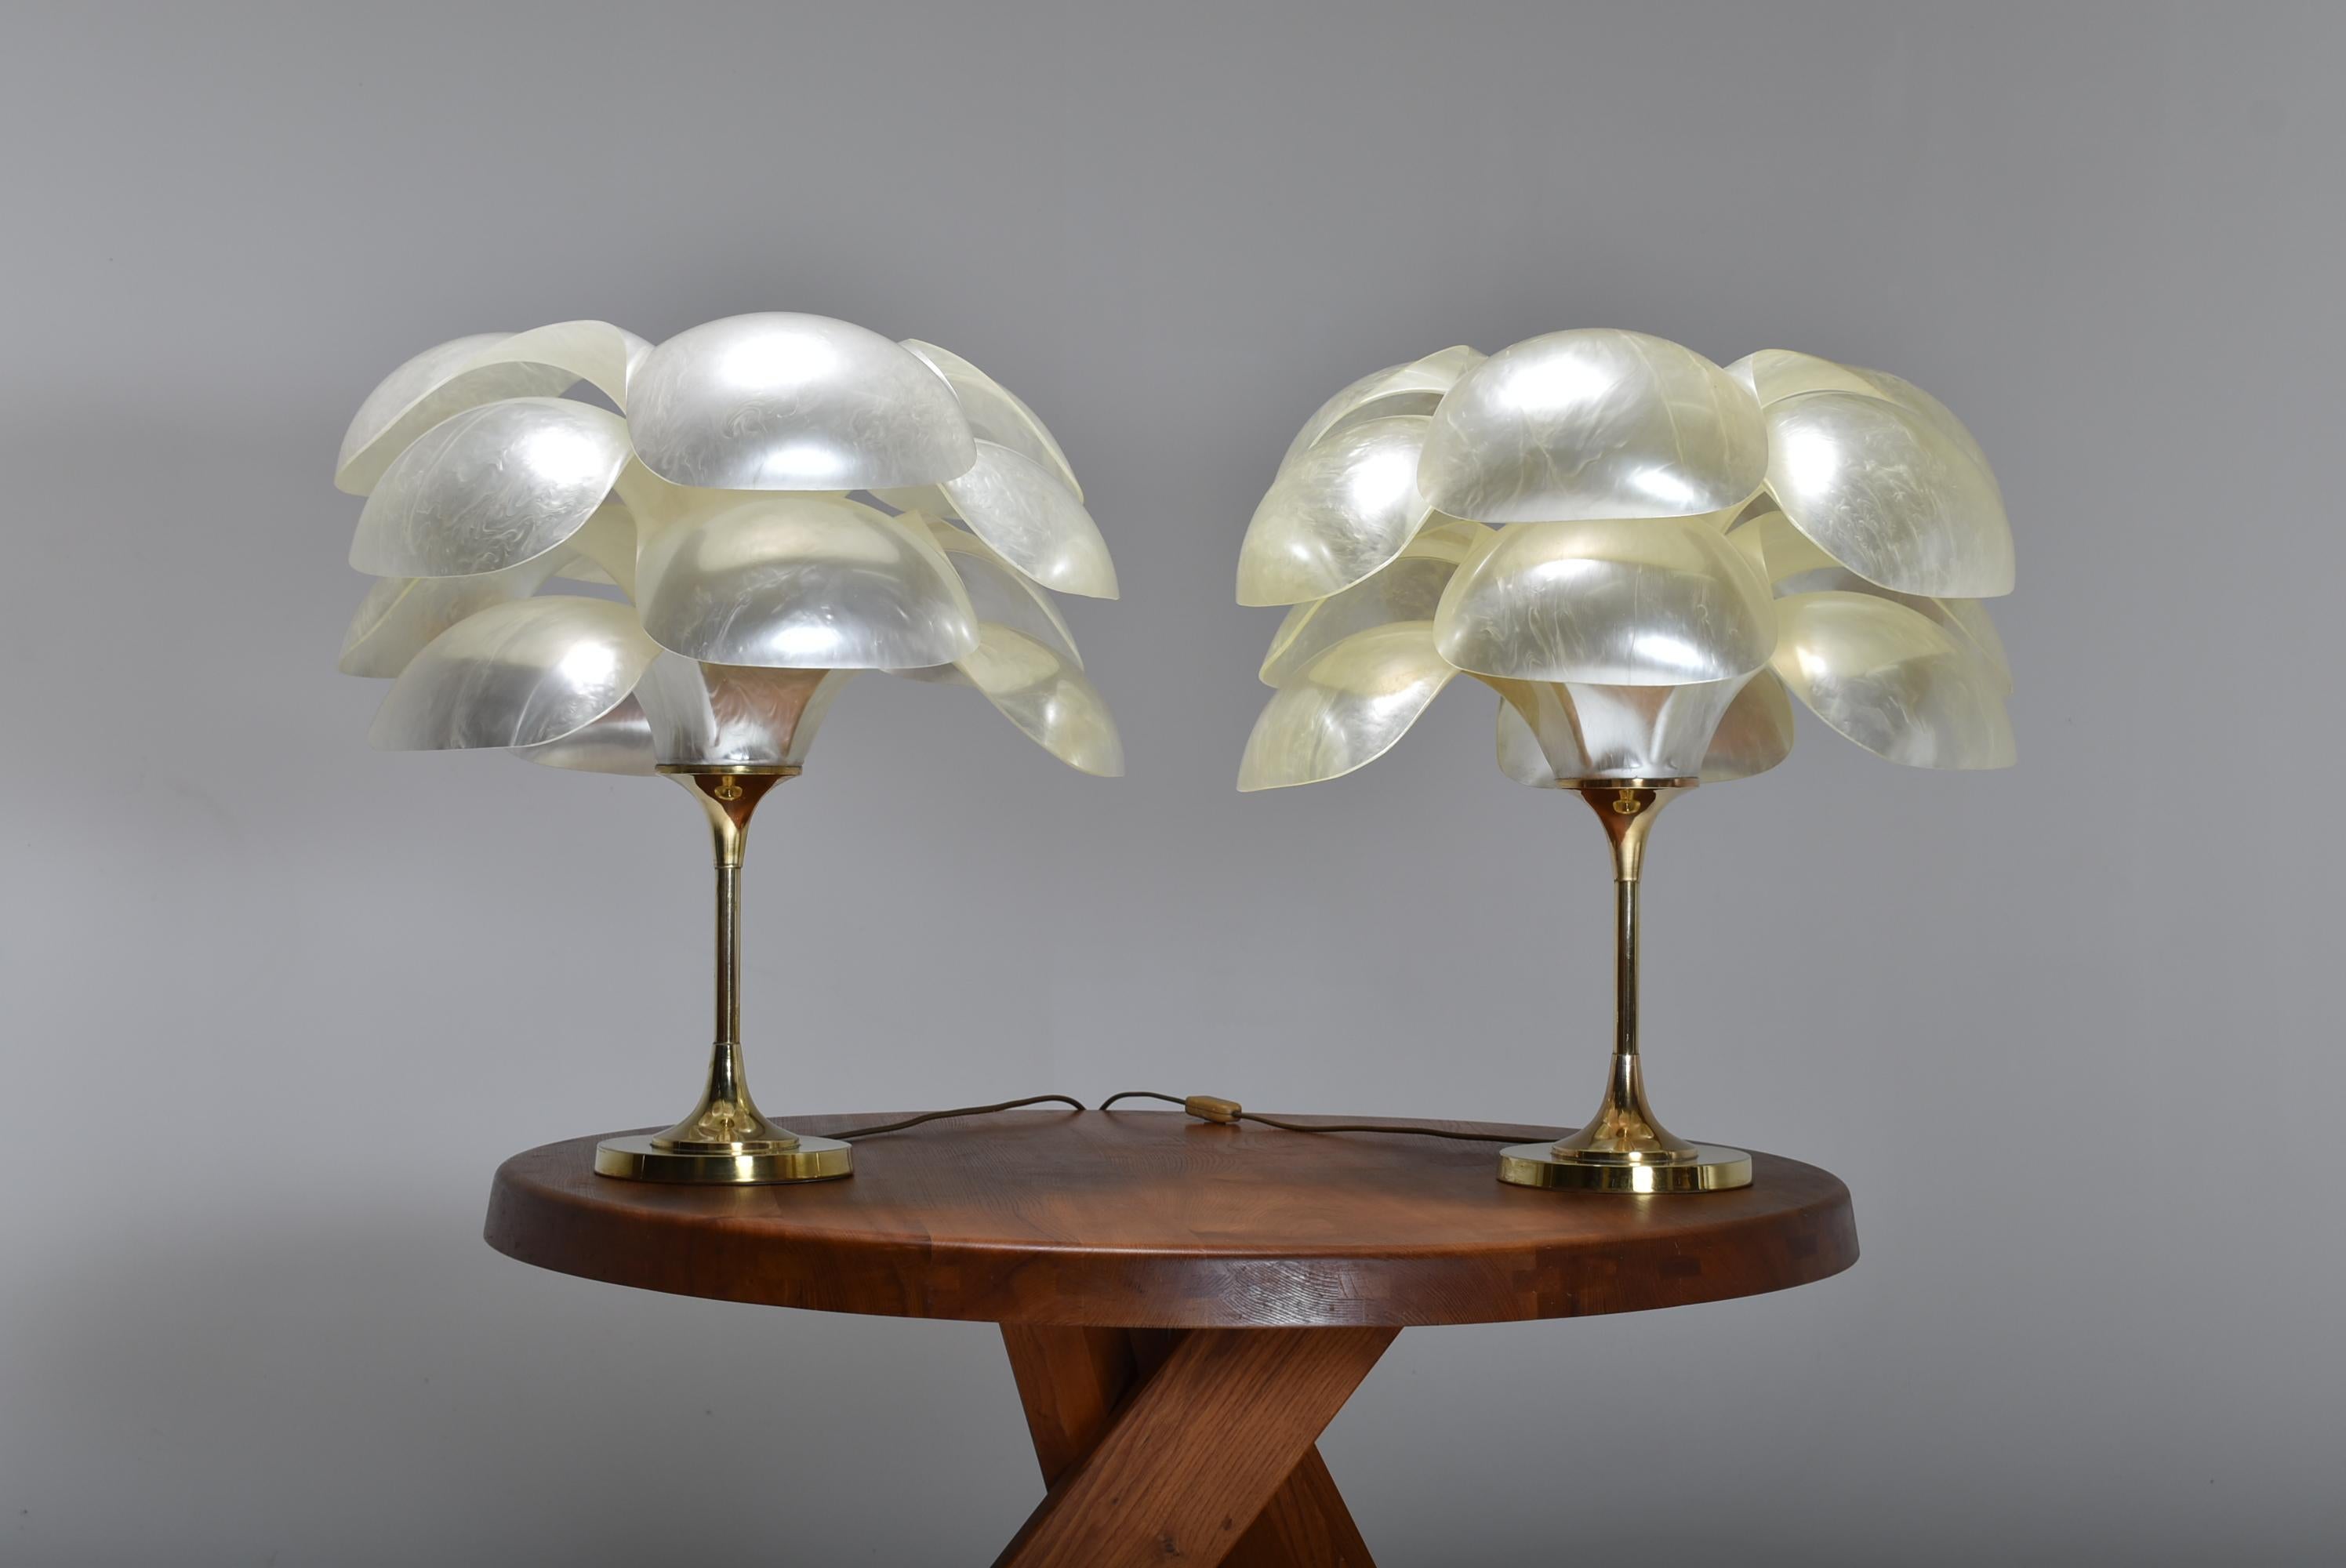 Rare set of two table lamps by Maison Rougier.
The big opalescent petals diffuse beautiful and soft light.
The lamps have a clear presence, and do not even need to be lighted, as one can see by the pictures.
This model is quite rare, and a pair